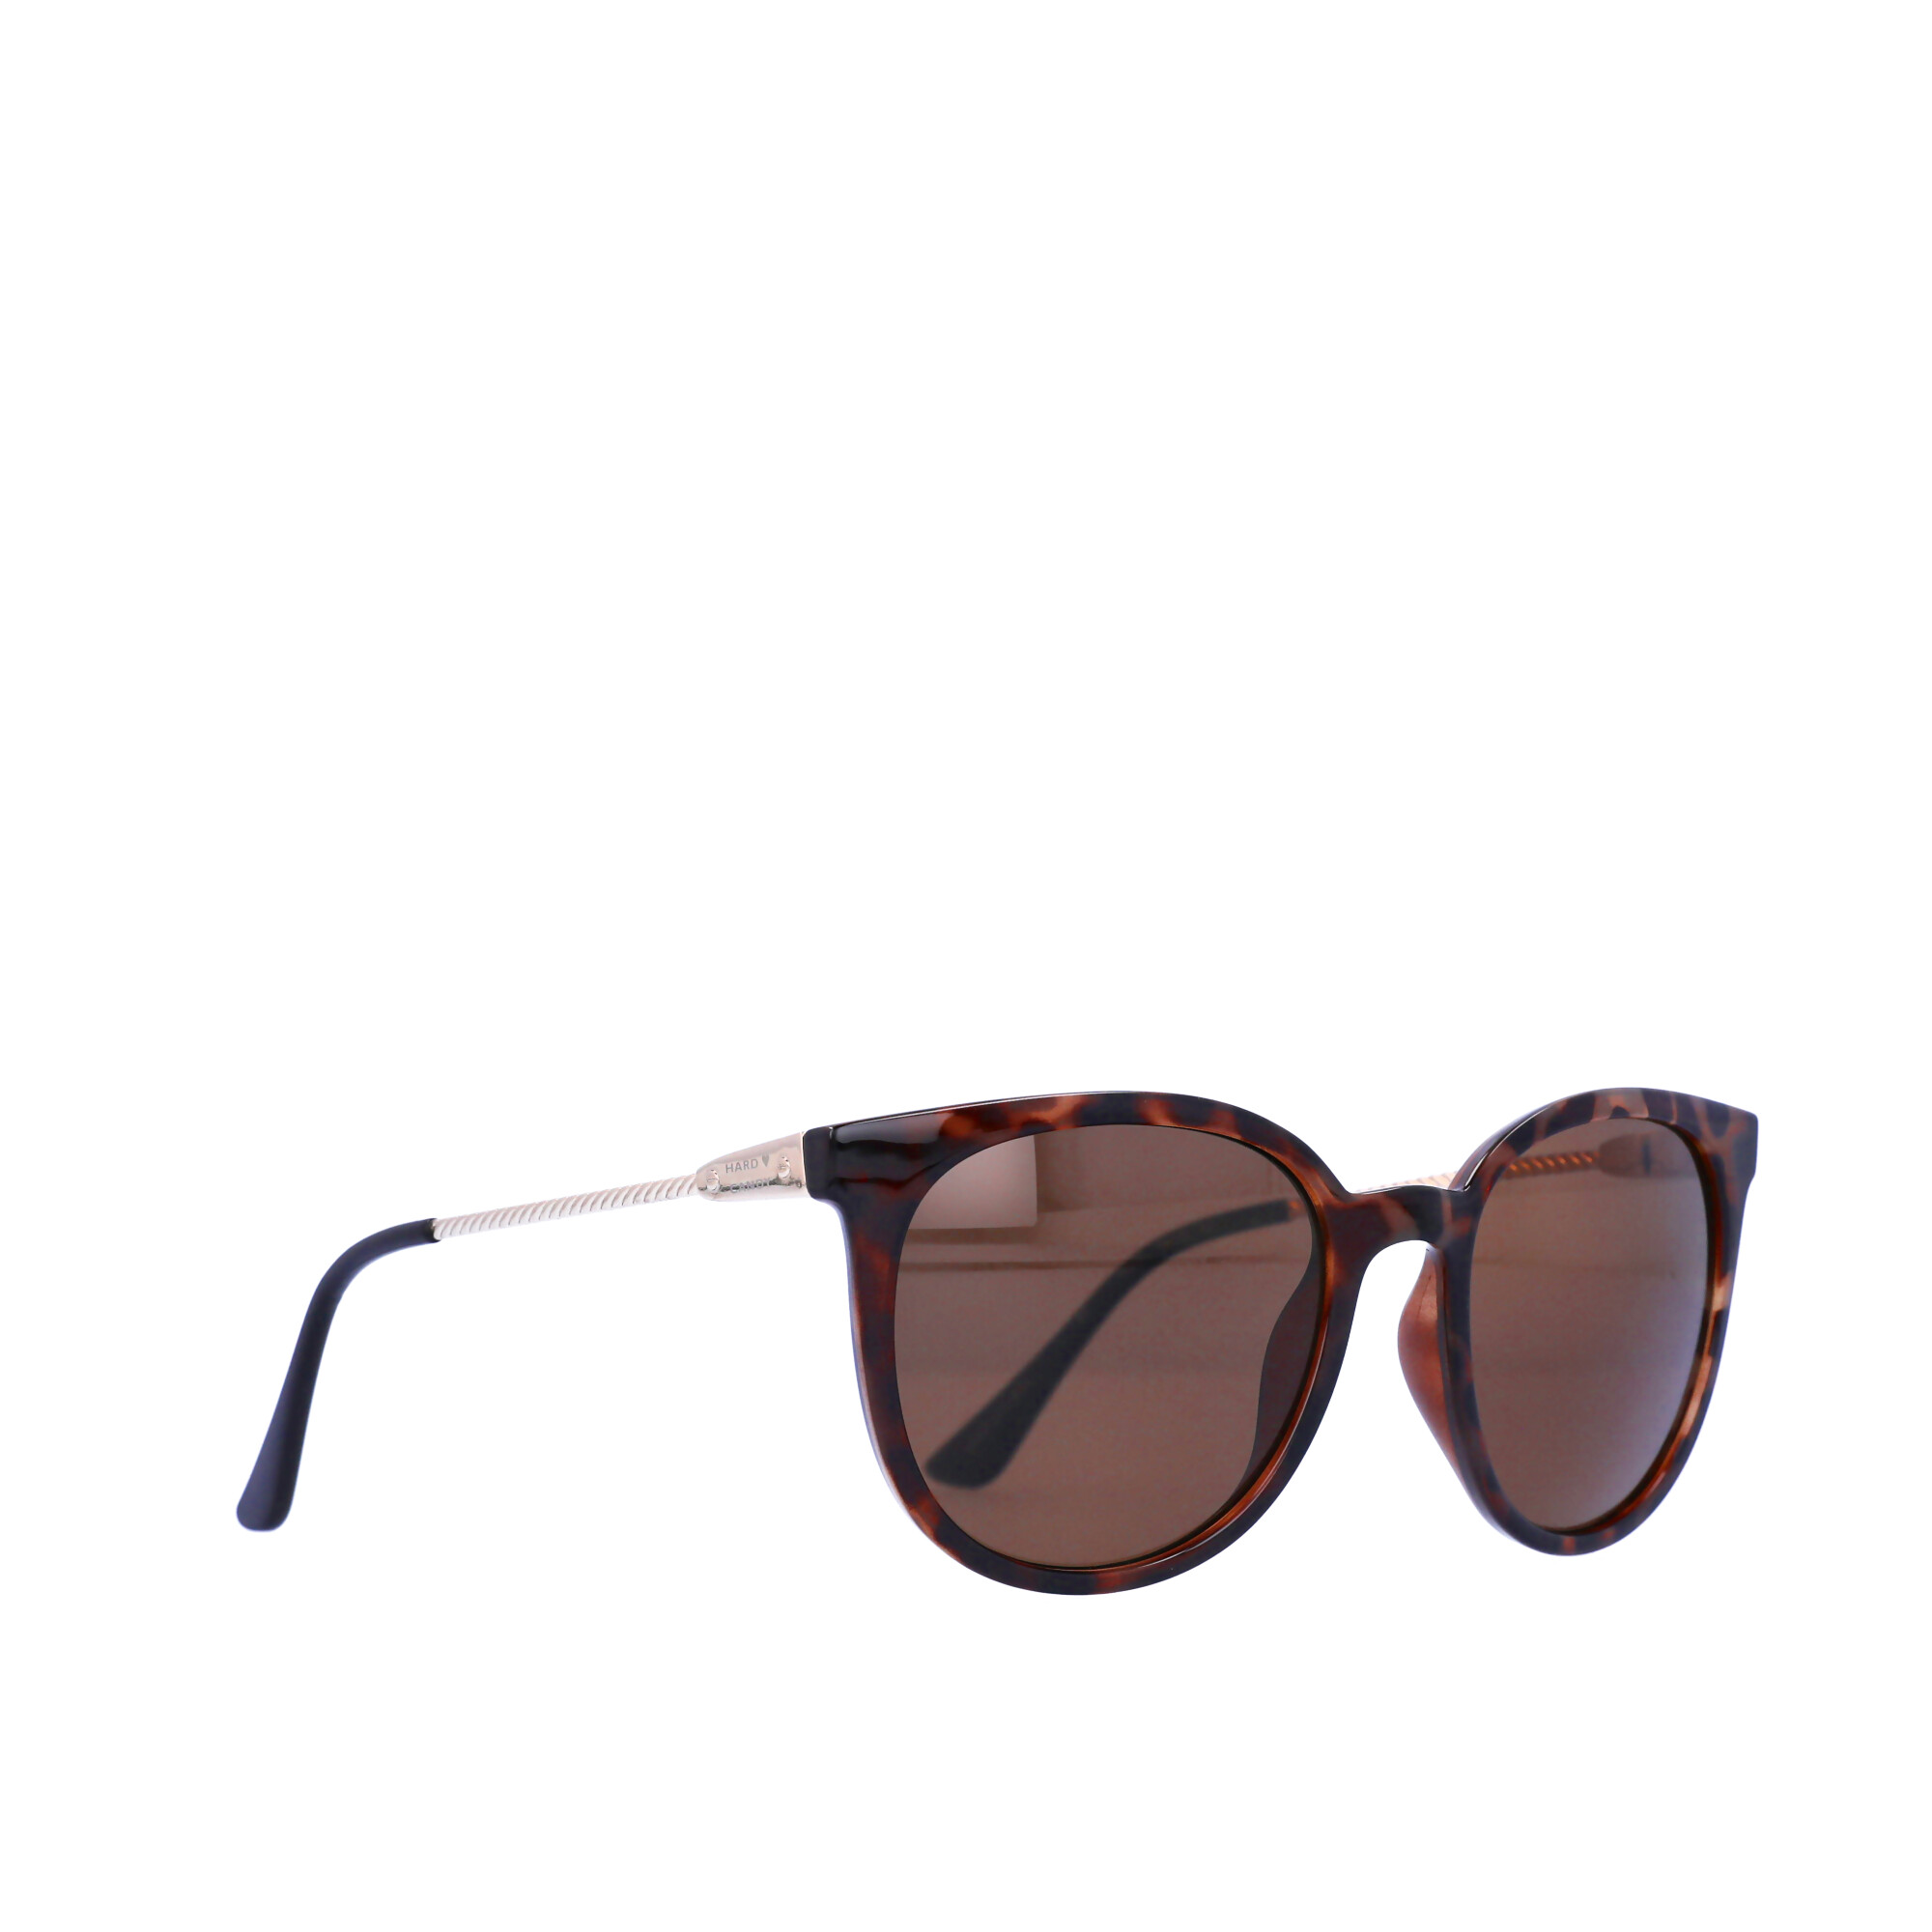 Hard Candy Womens Rx'able Sunglasses, Hs15, Dark Tortoise Patterned, 54-20-143, with Case - image 2 of 13